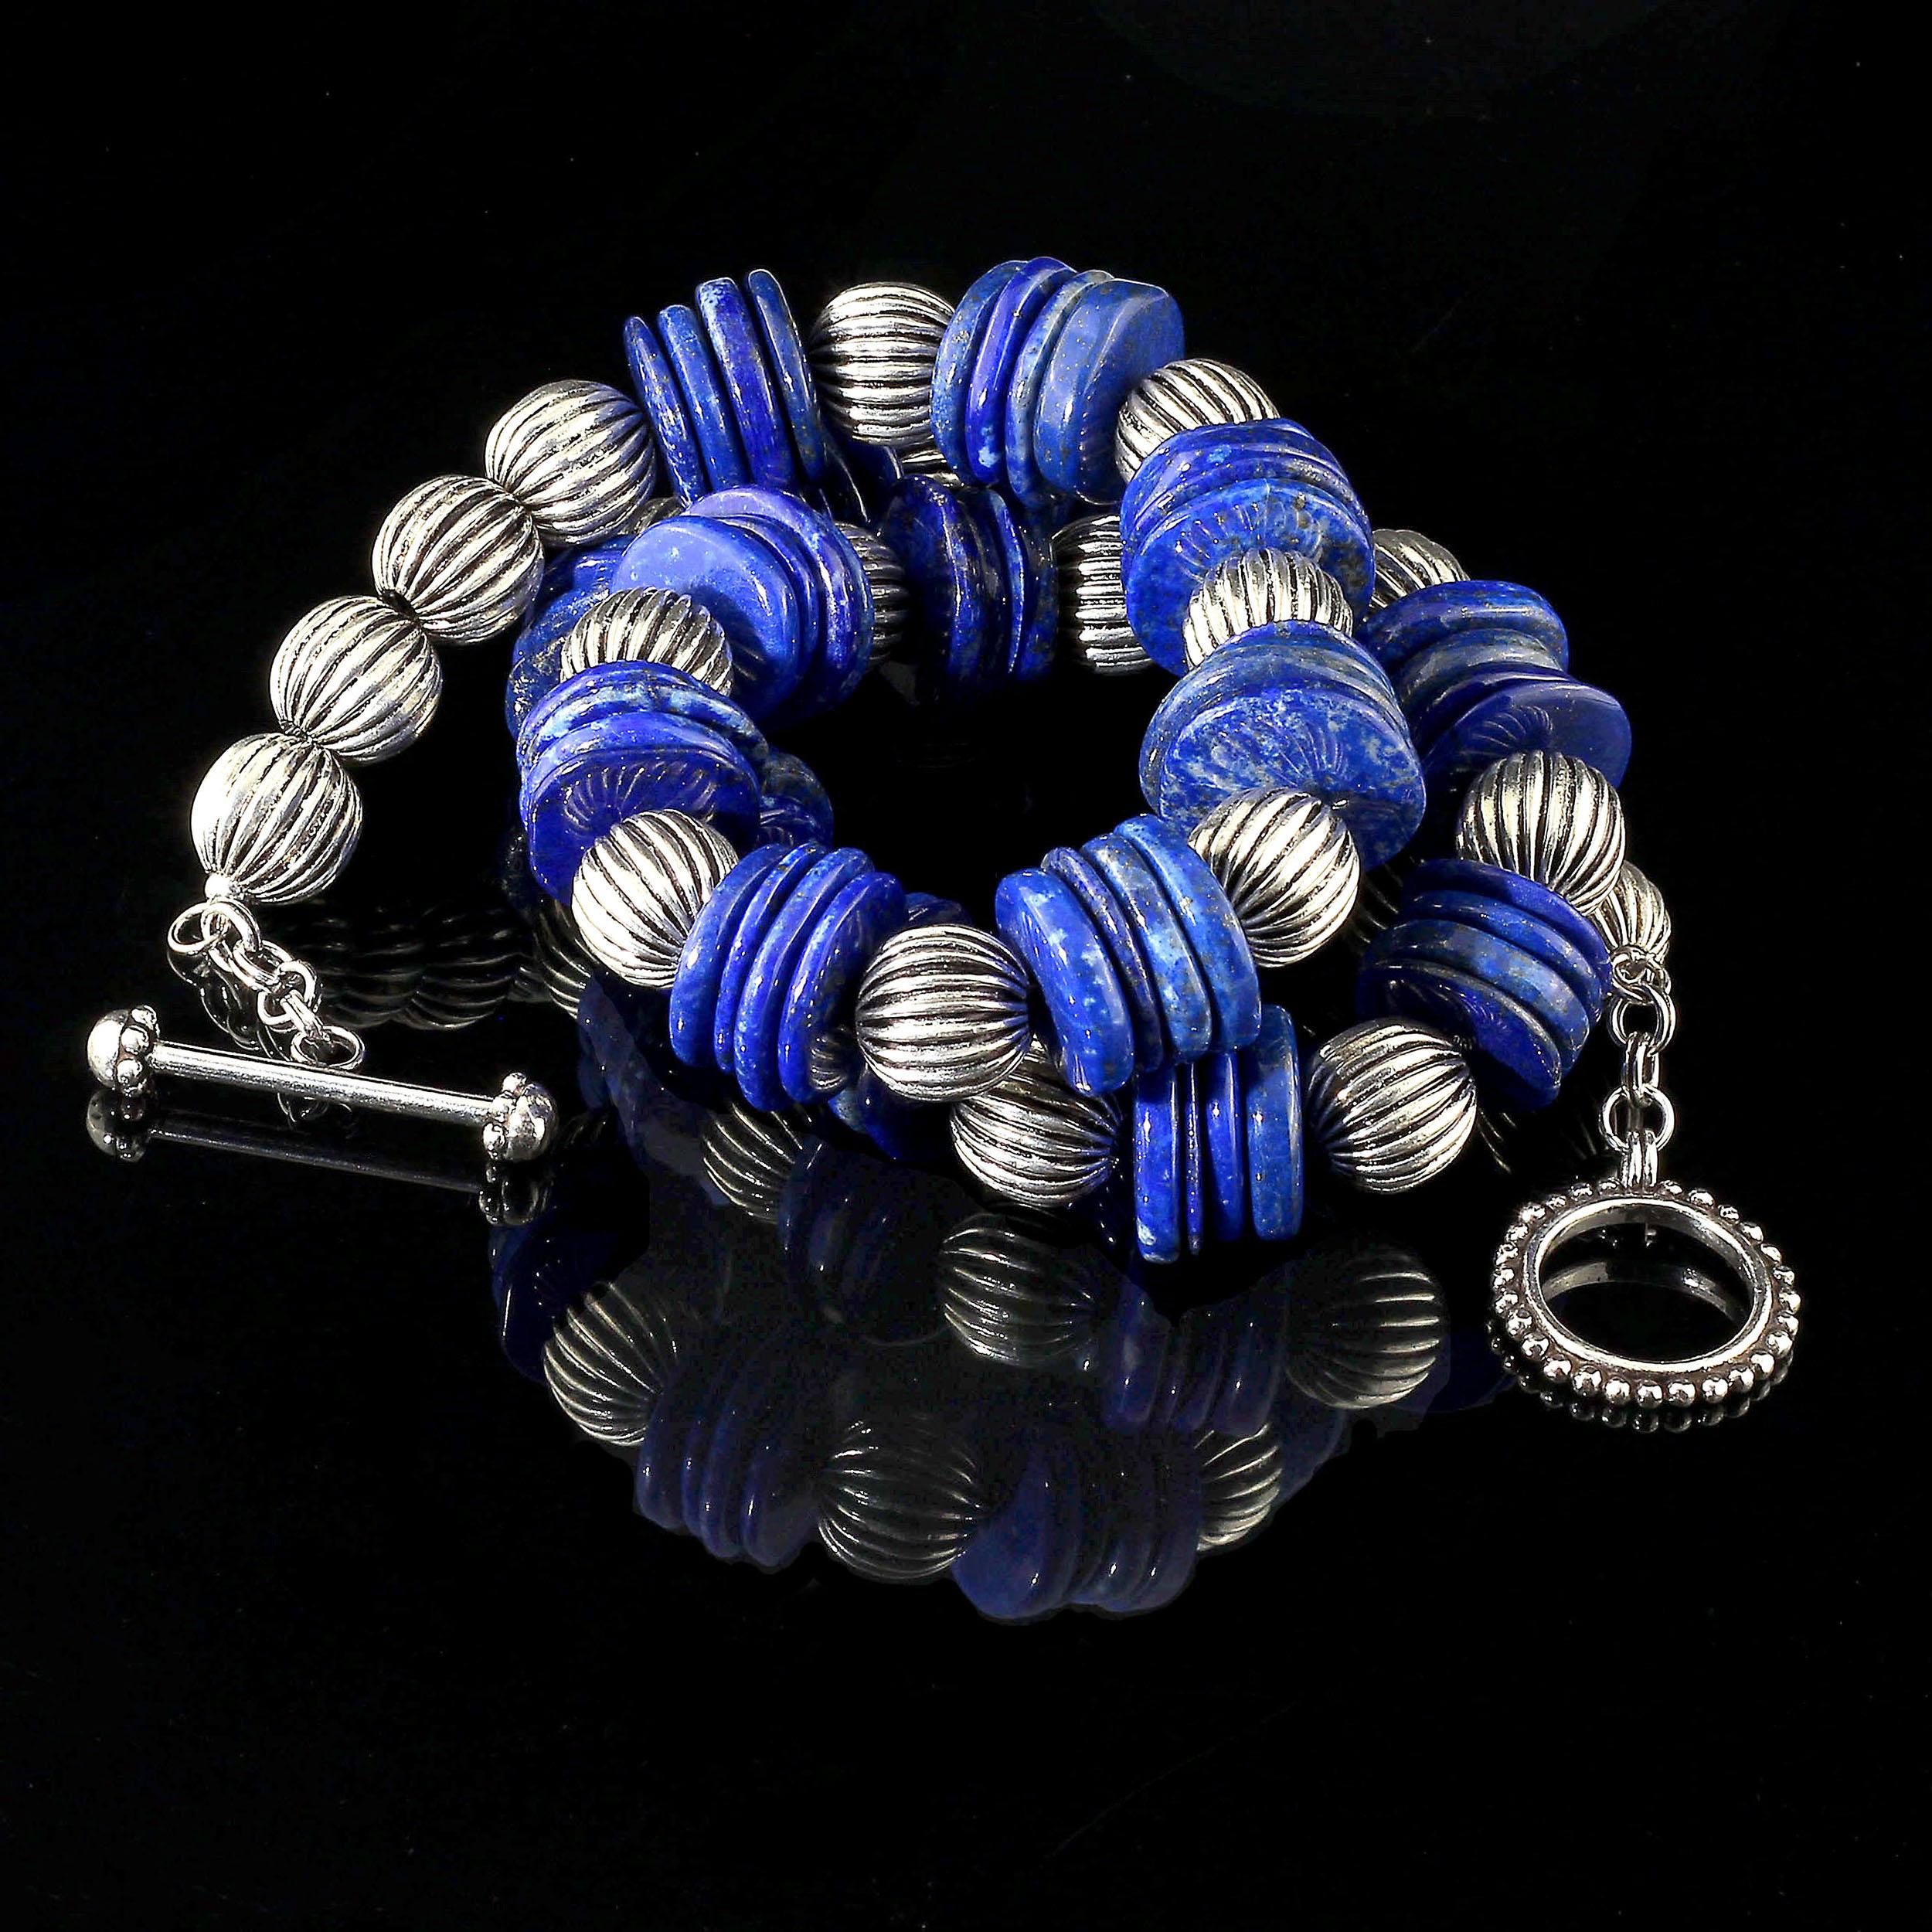 AJD Necklace of Blue Lapis Lazuli Slices with Ribbed Silver Accents 1